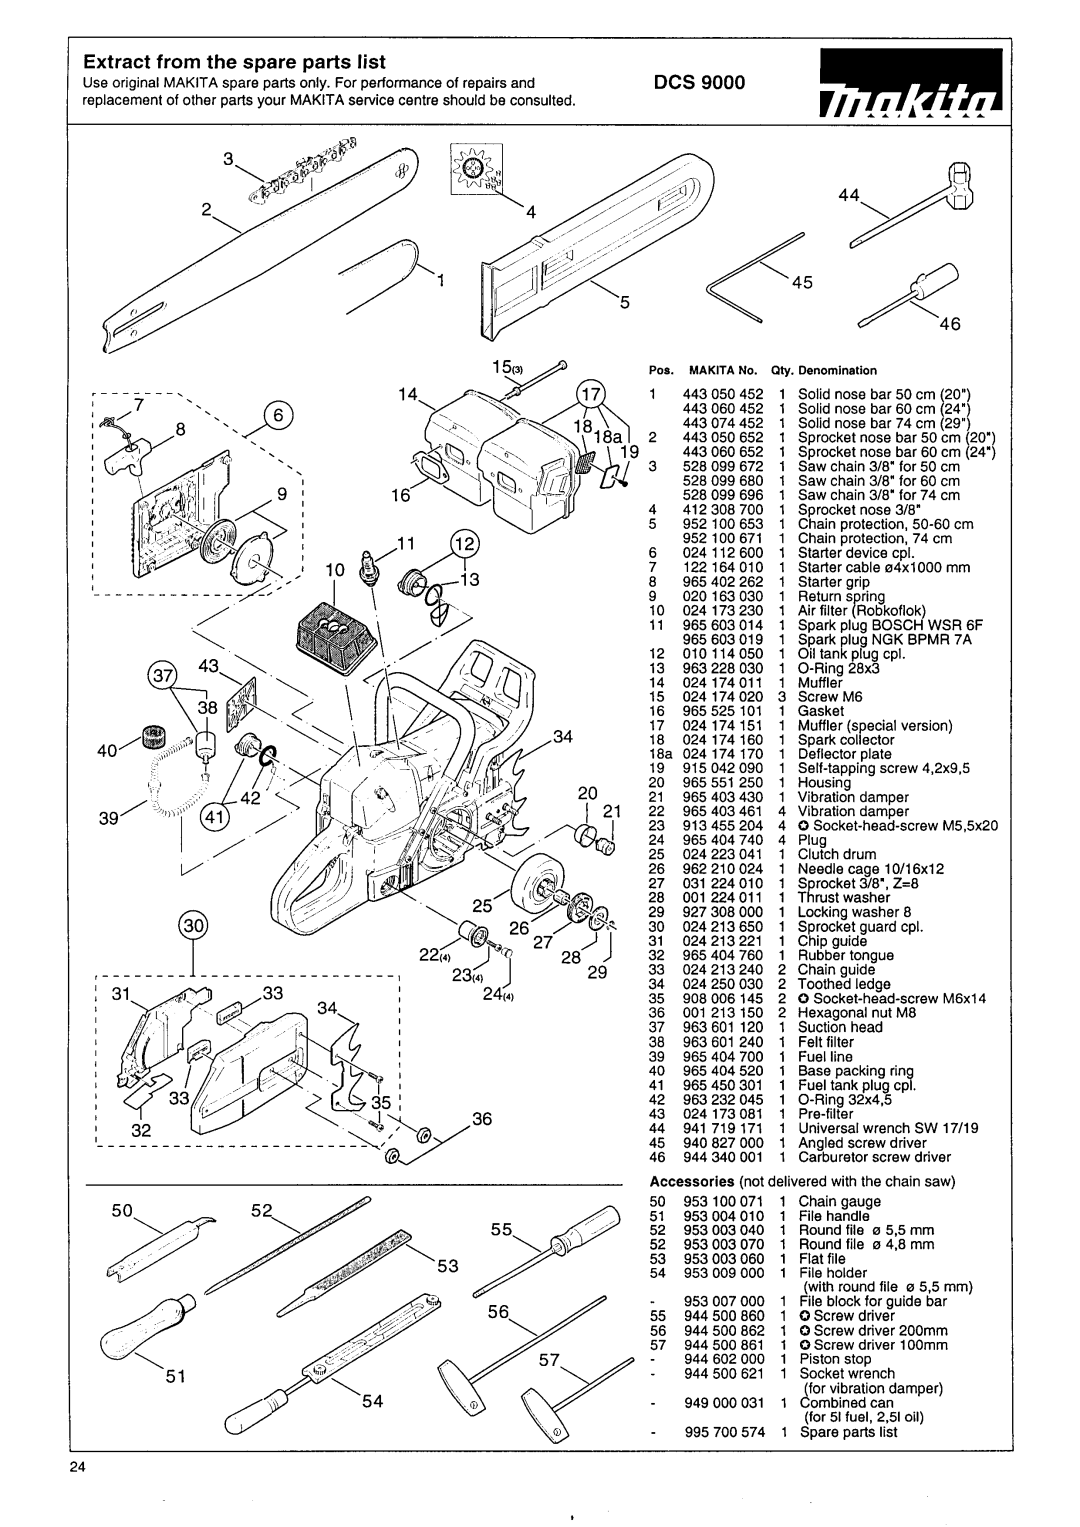 Makita DCS 9000 manual Extract from the spare parts list 